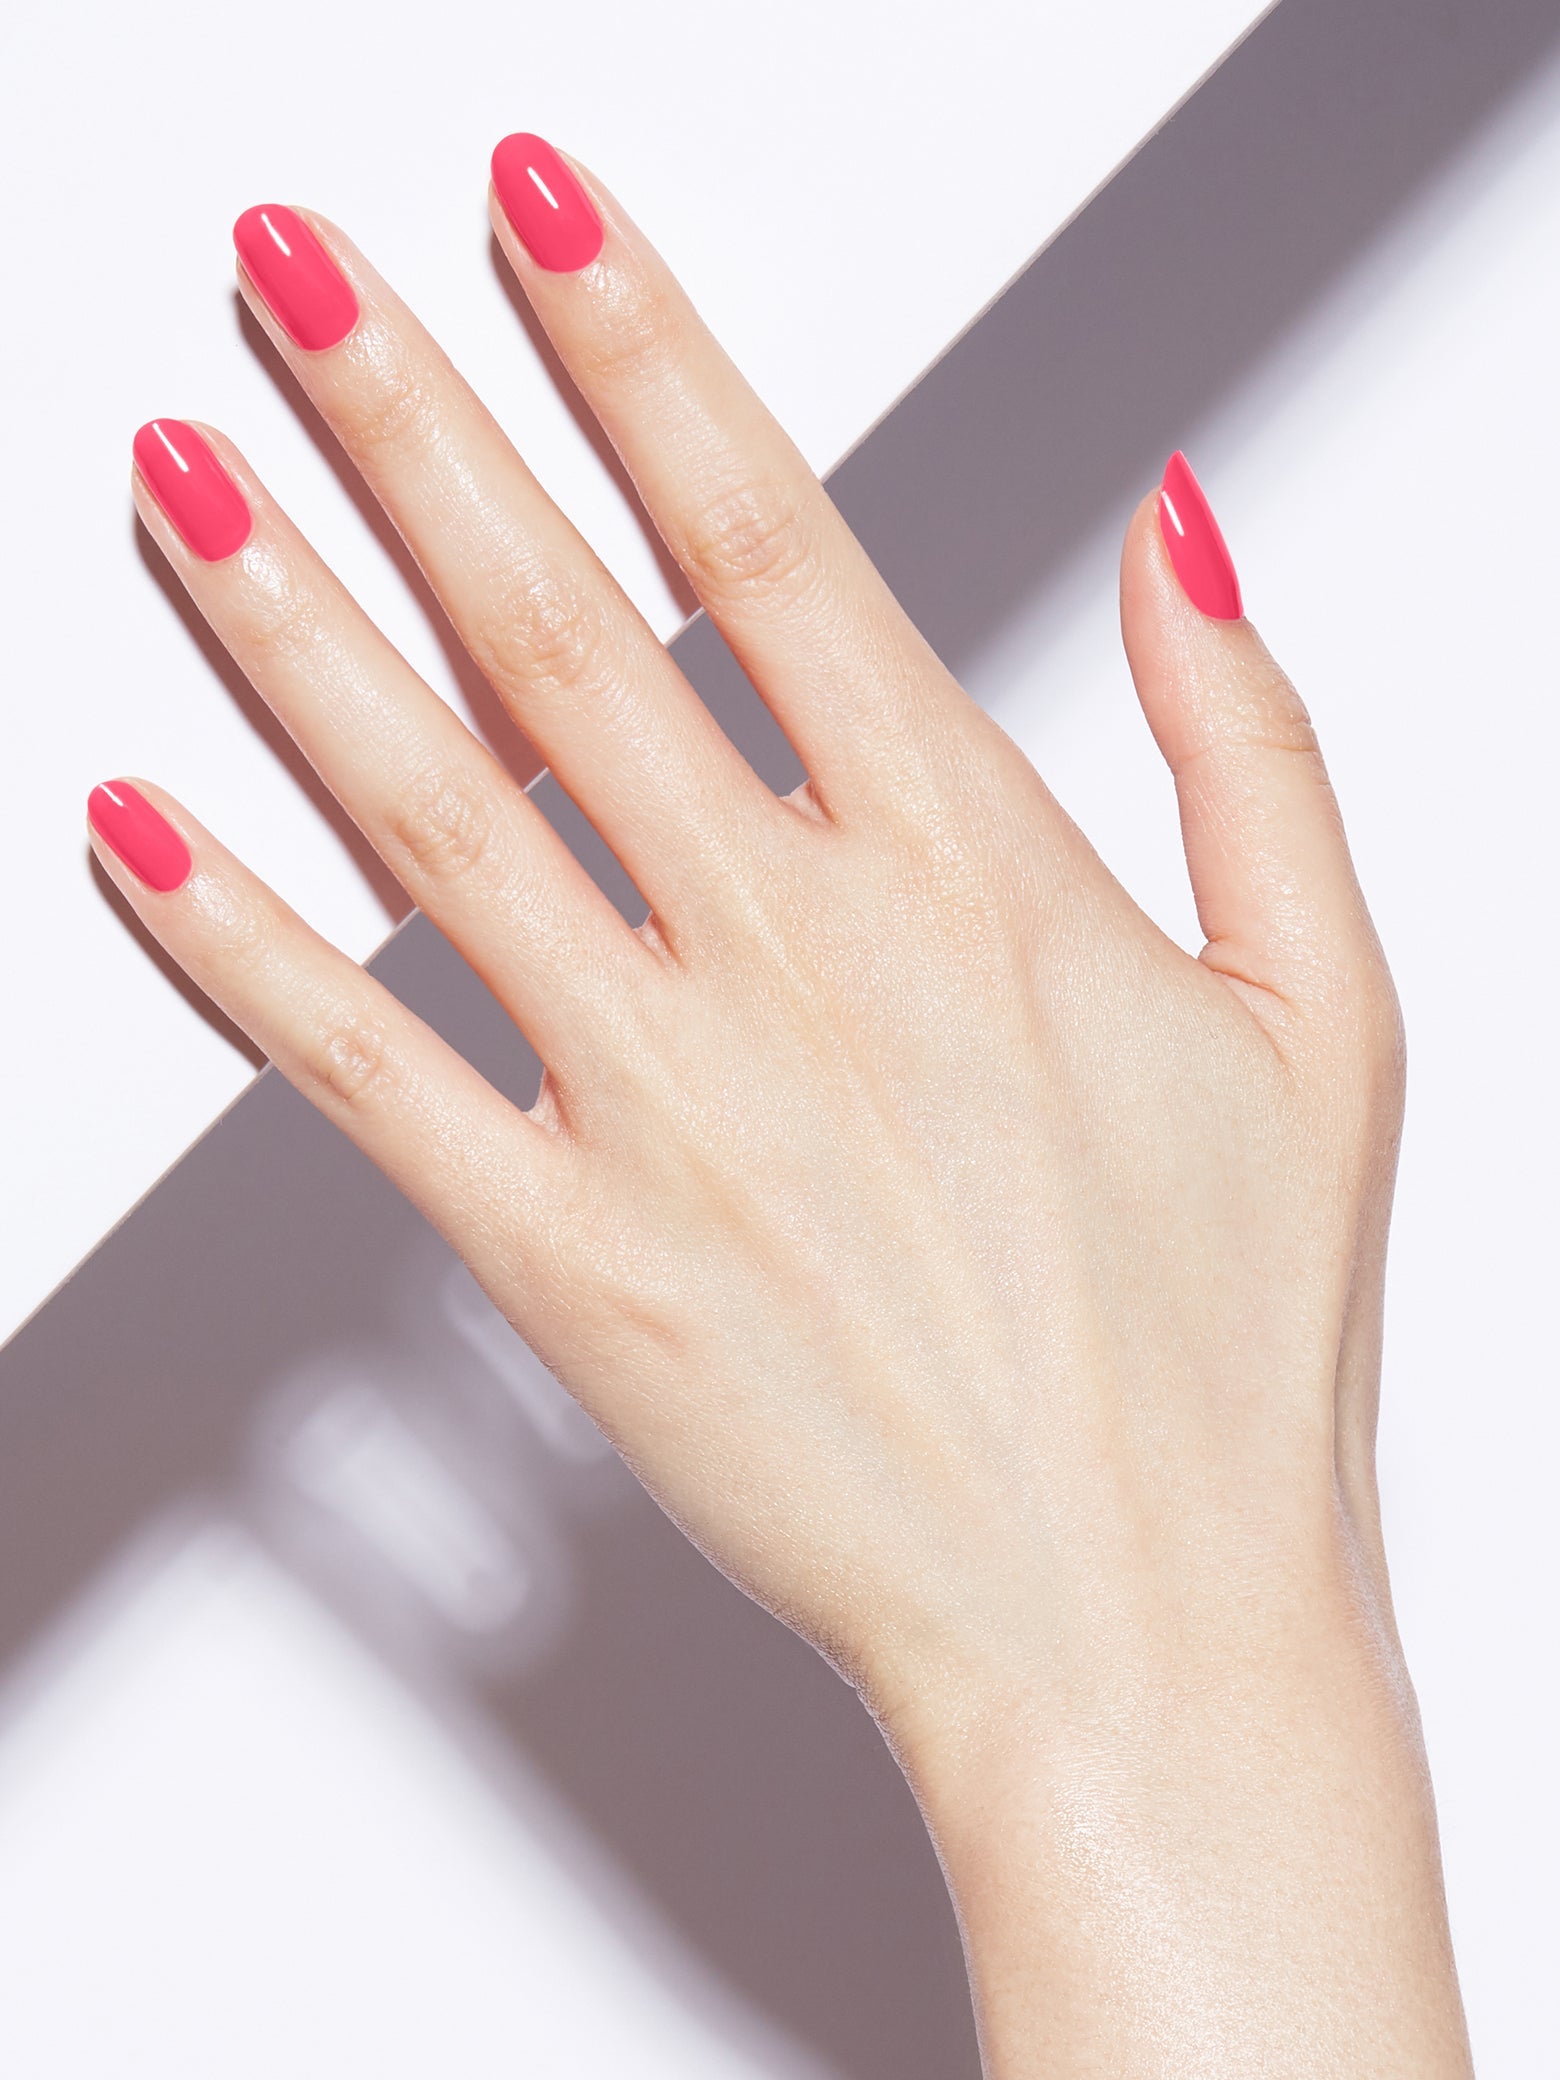 Bright coral pink, Full coverage, Light